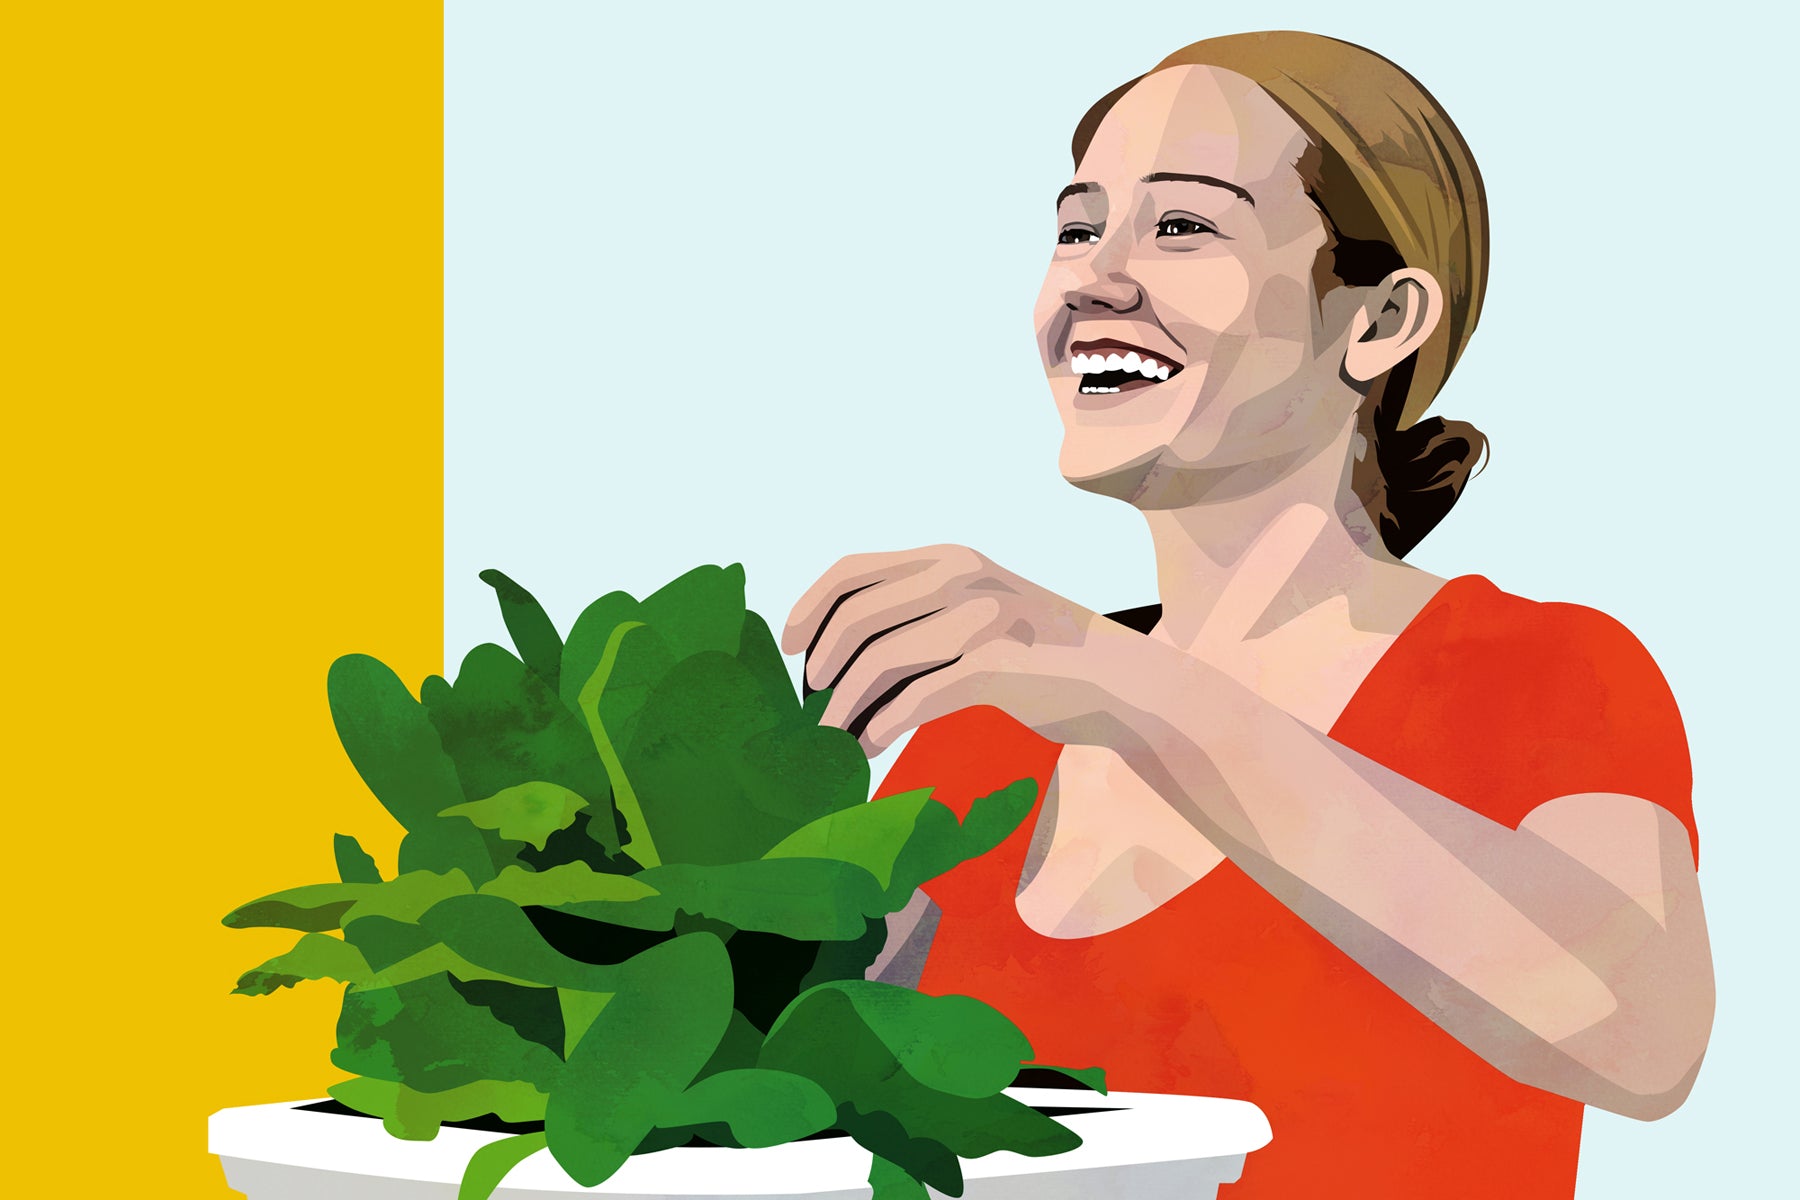 Illustration of a woman in a red shirt, smiling while using the SucSeed hydroponic system, built by at-risk youth.